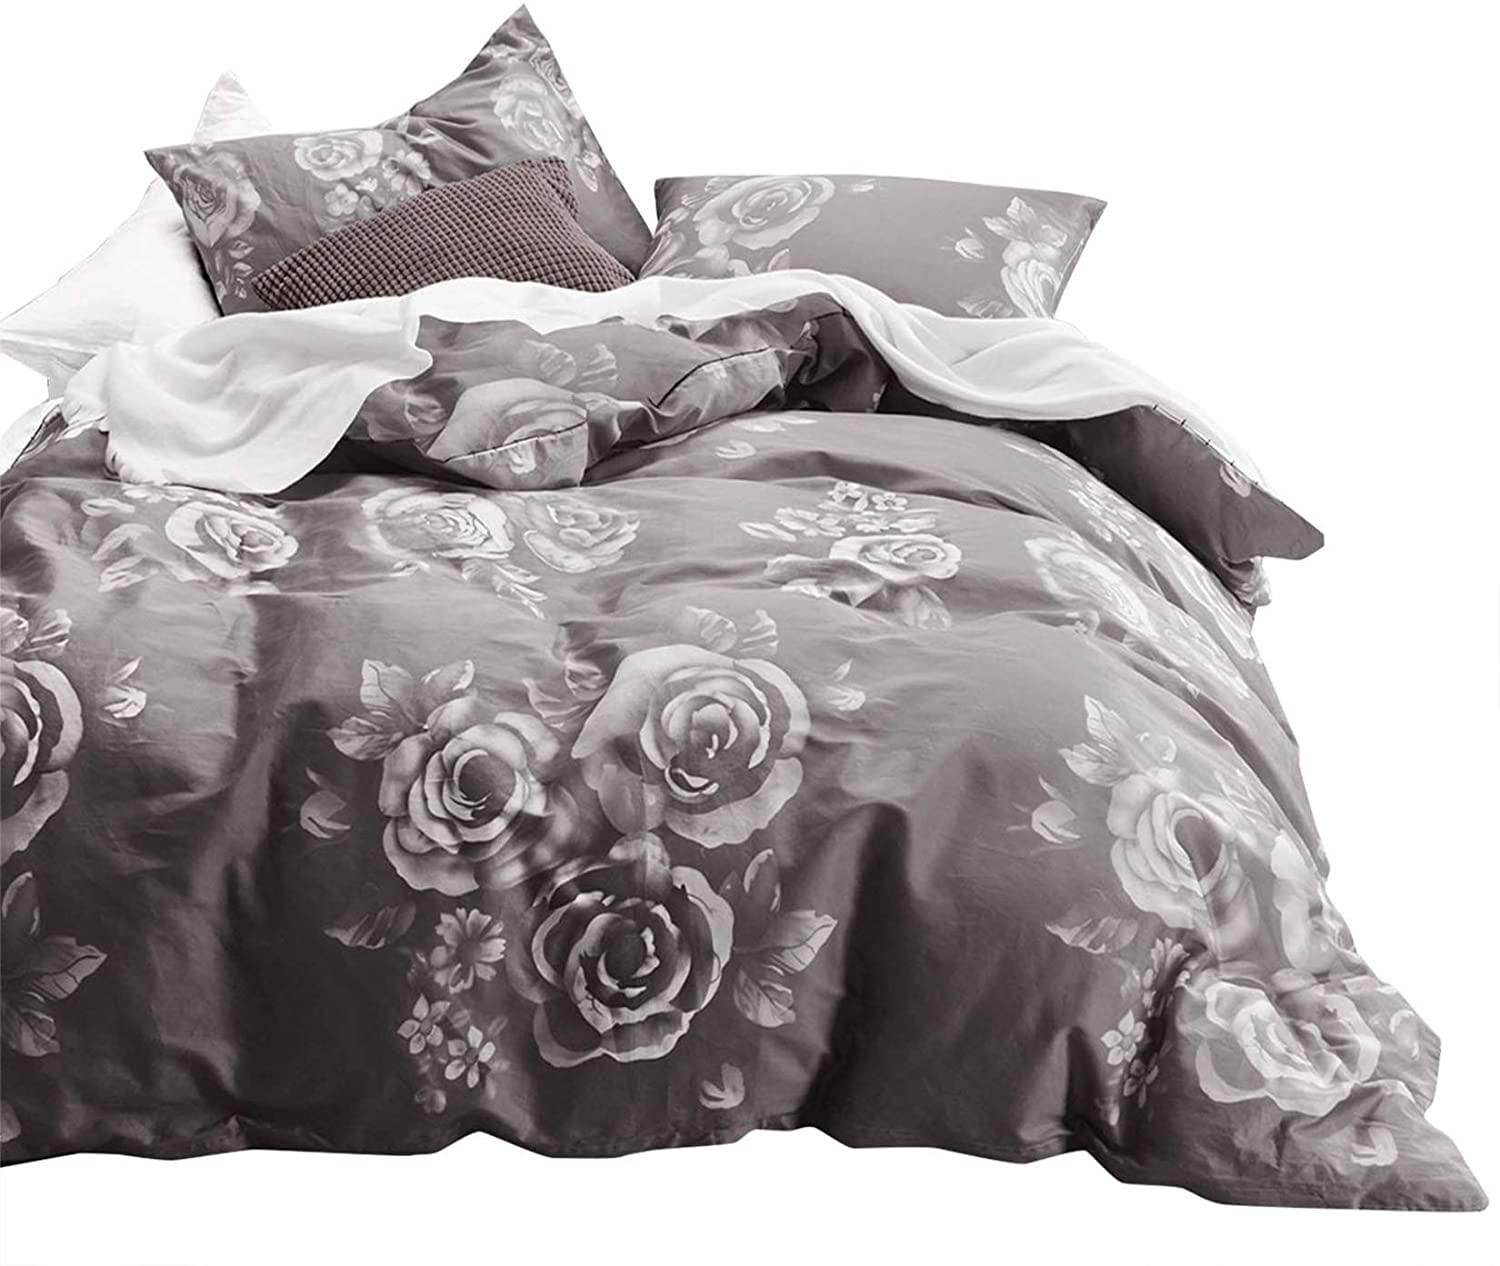 Gray Floral Duvet Cover Set, 100% Cotton Bedding, White Rose Flowers  Pattern Printed on Dark Grey, with Zipper Closure (3pcs, King Size)